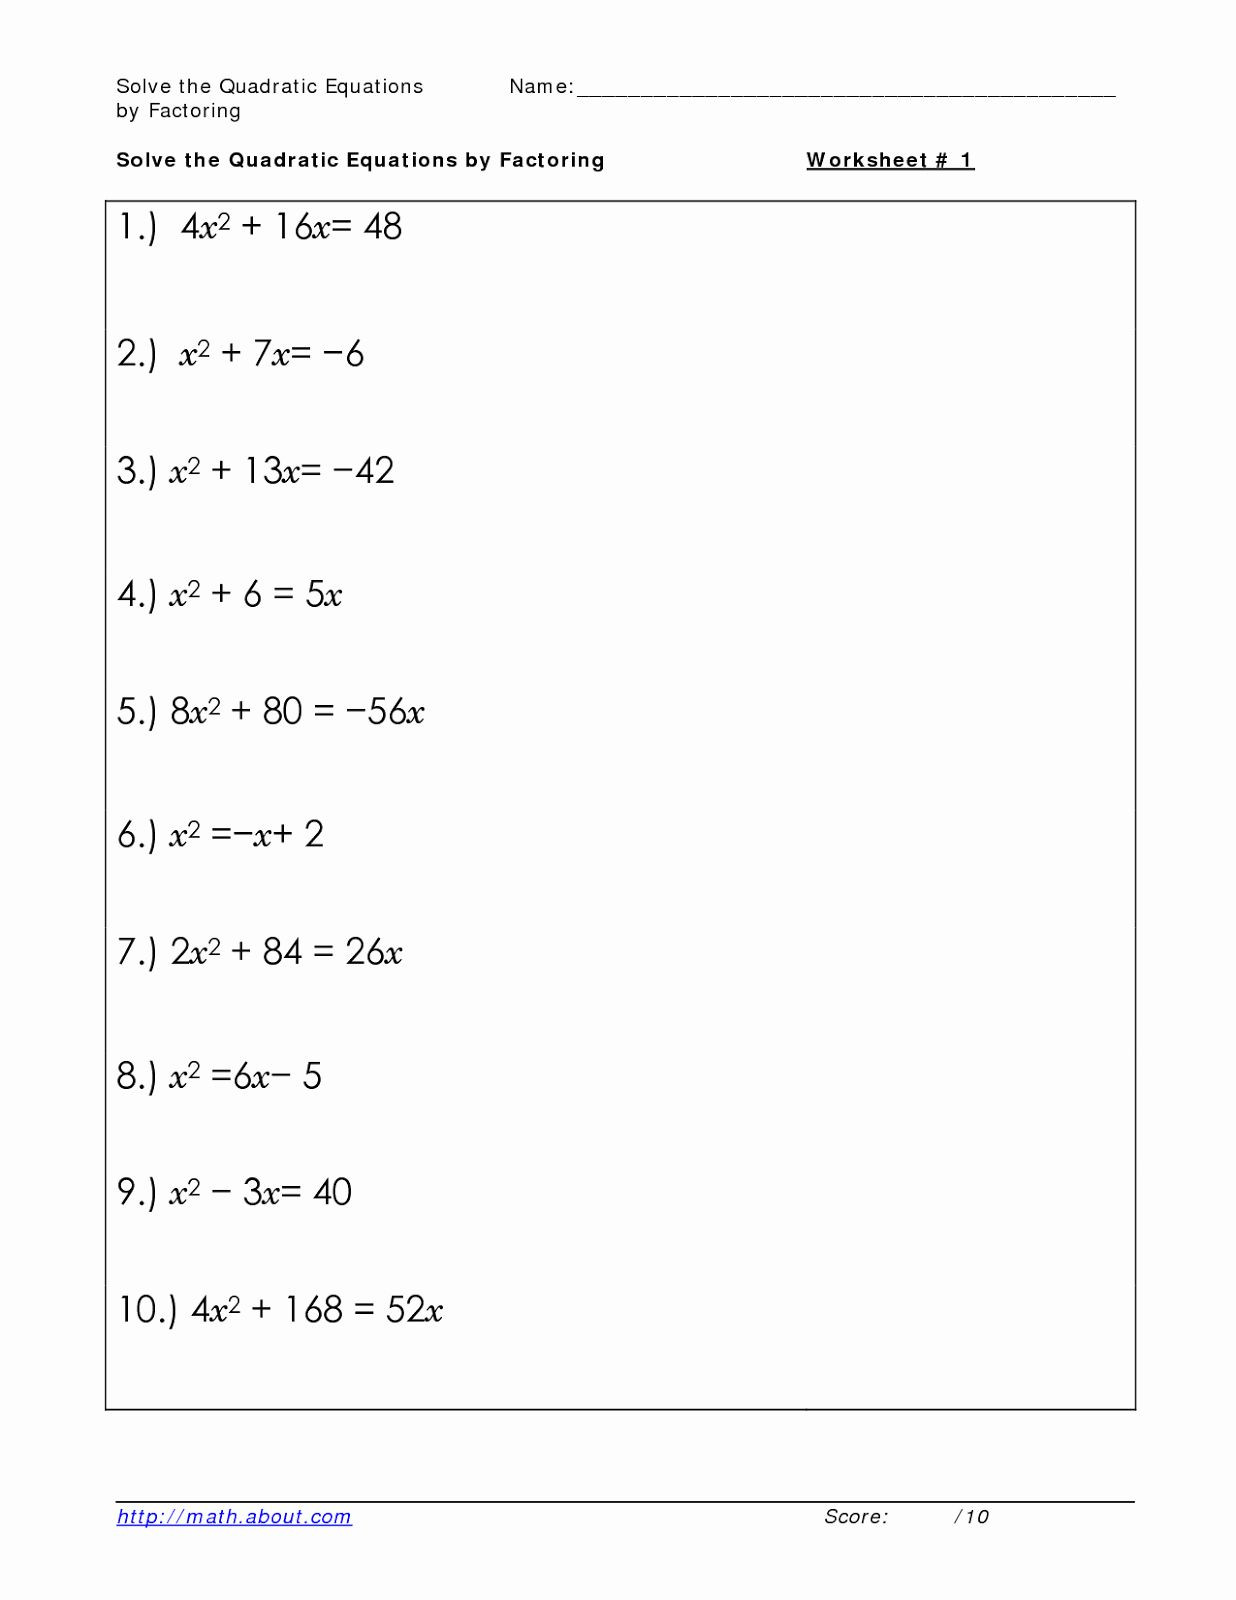 Completing the Square Practice Worksheet 50 solve by Factoring Worksheet In 2020